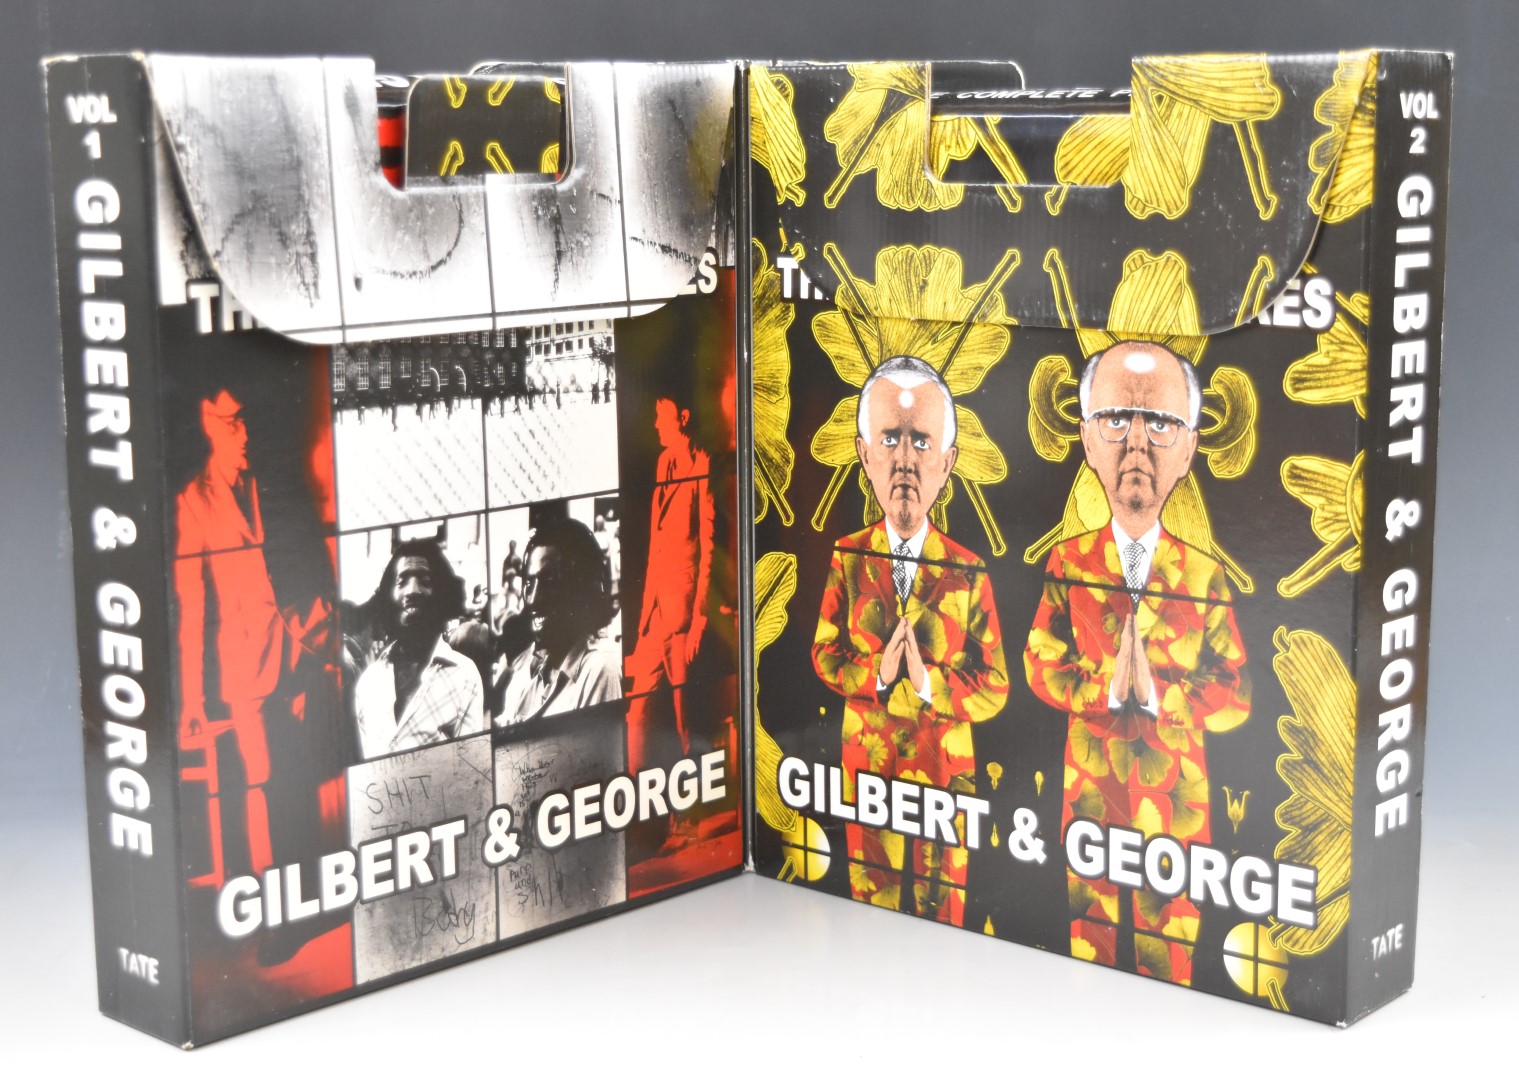 Gilbert & George The Complete Pictures 1971-2005 in 2 volumes with an introduction by Rudi Fuchs, - Image 2 of 5